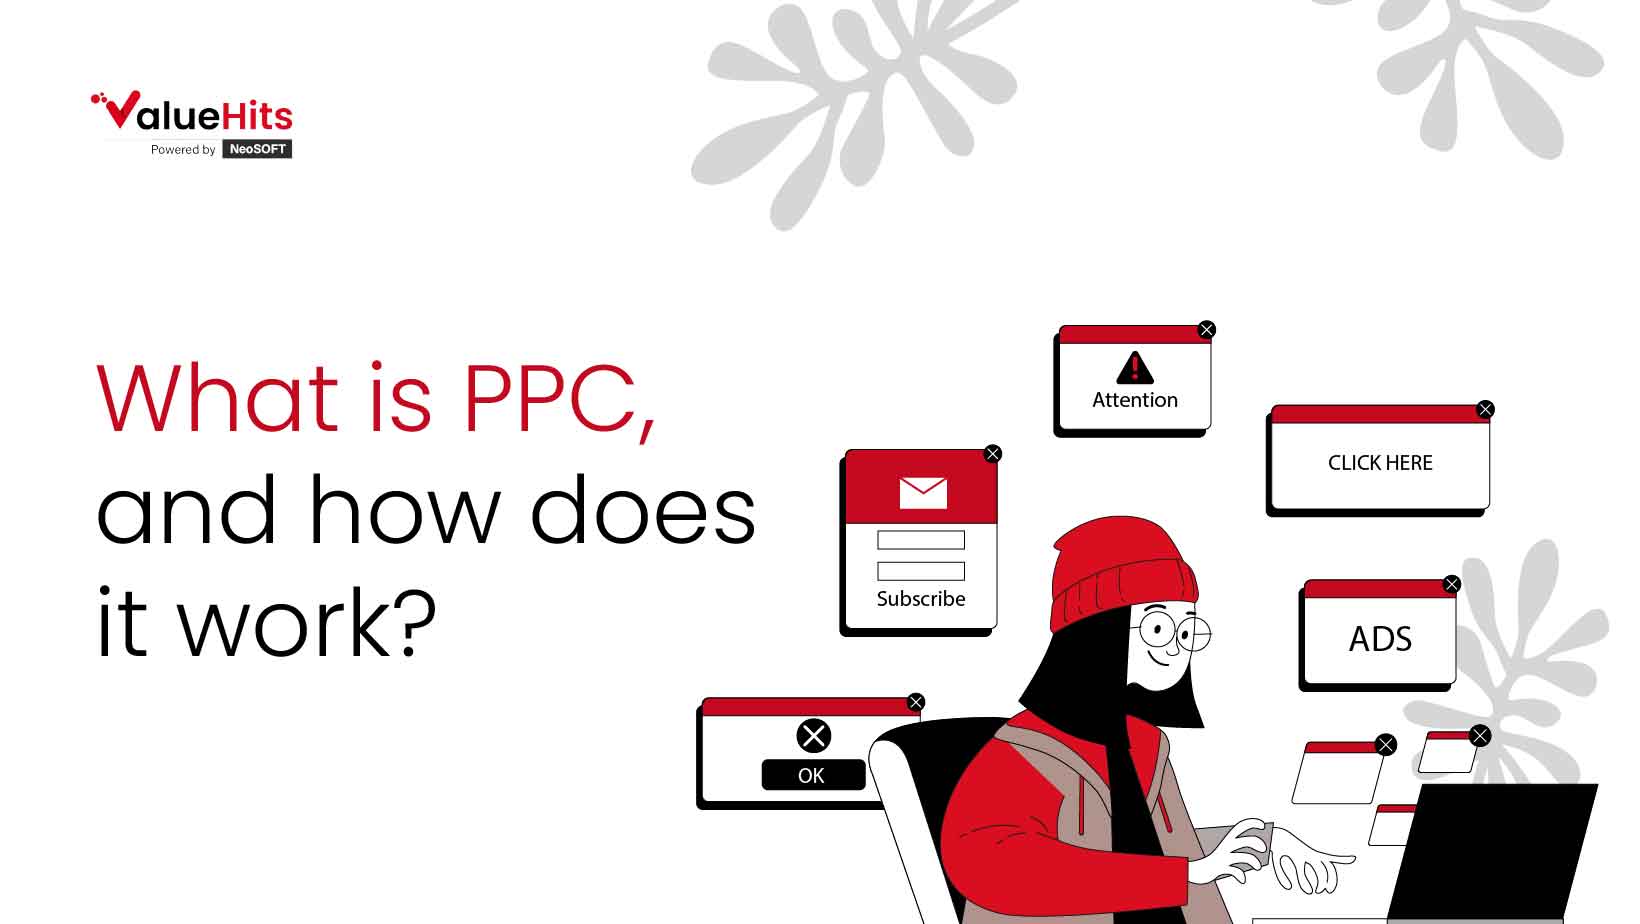 What is PPC, and how does it work?